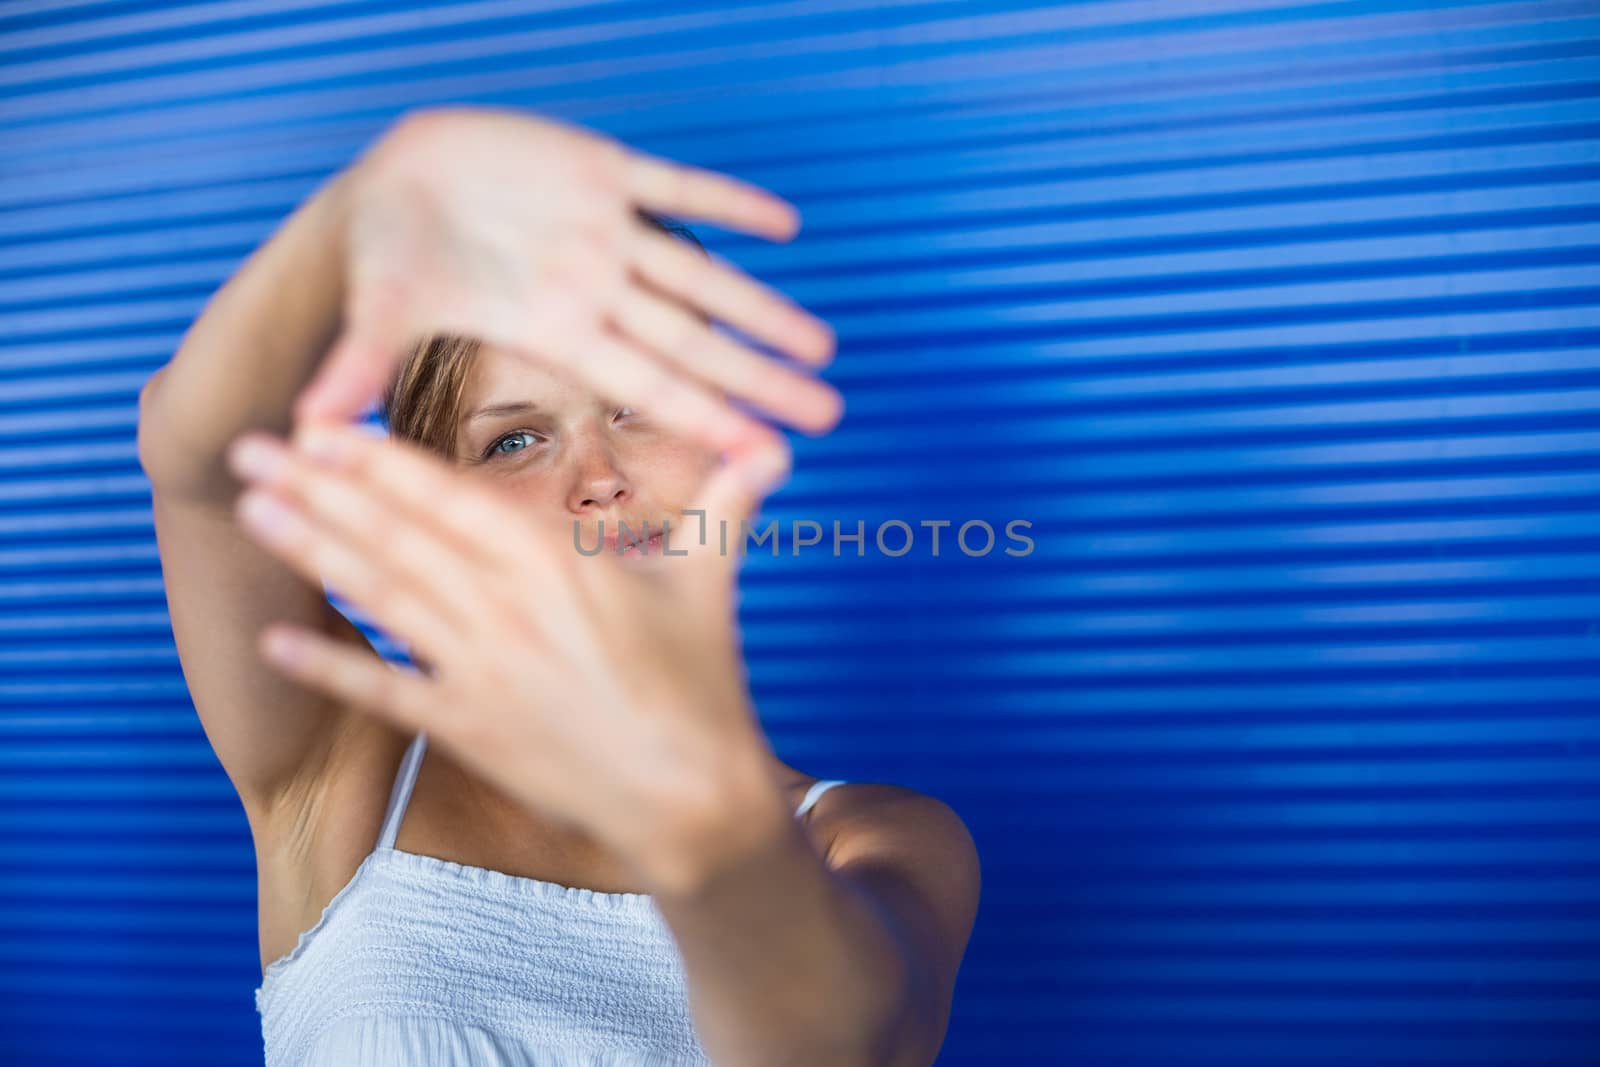 Pretty, young woman making a photo composing/shooting gesture with her hands